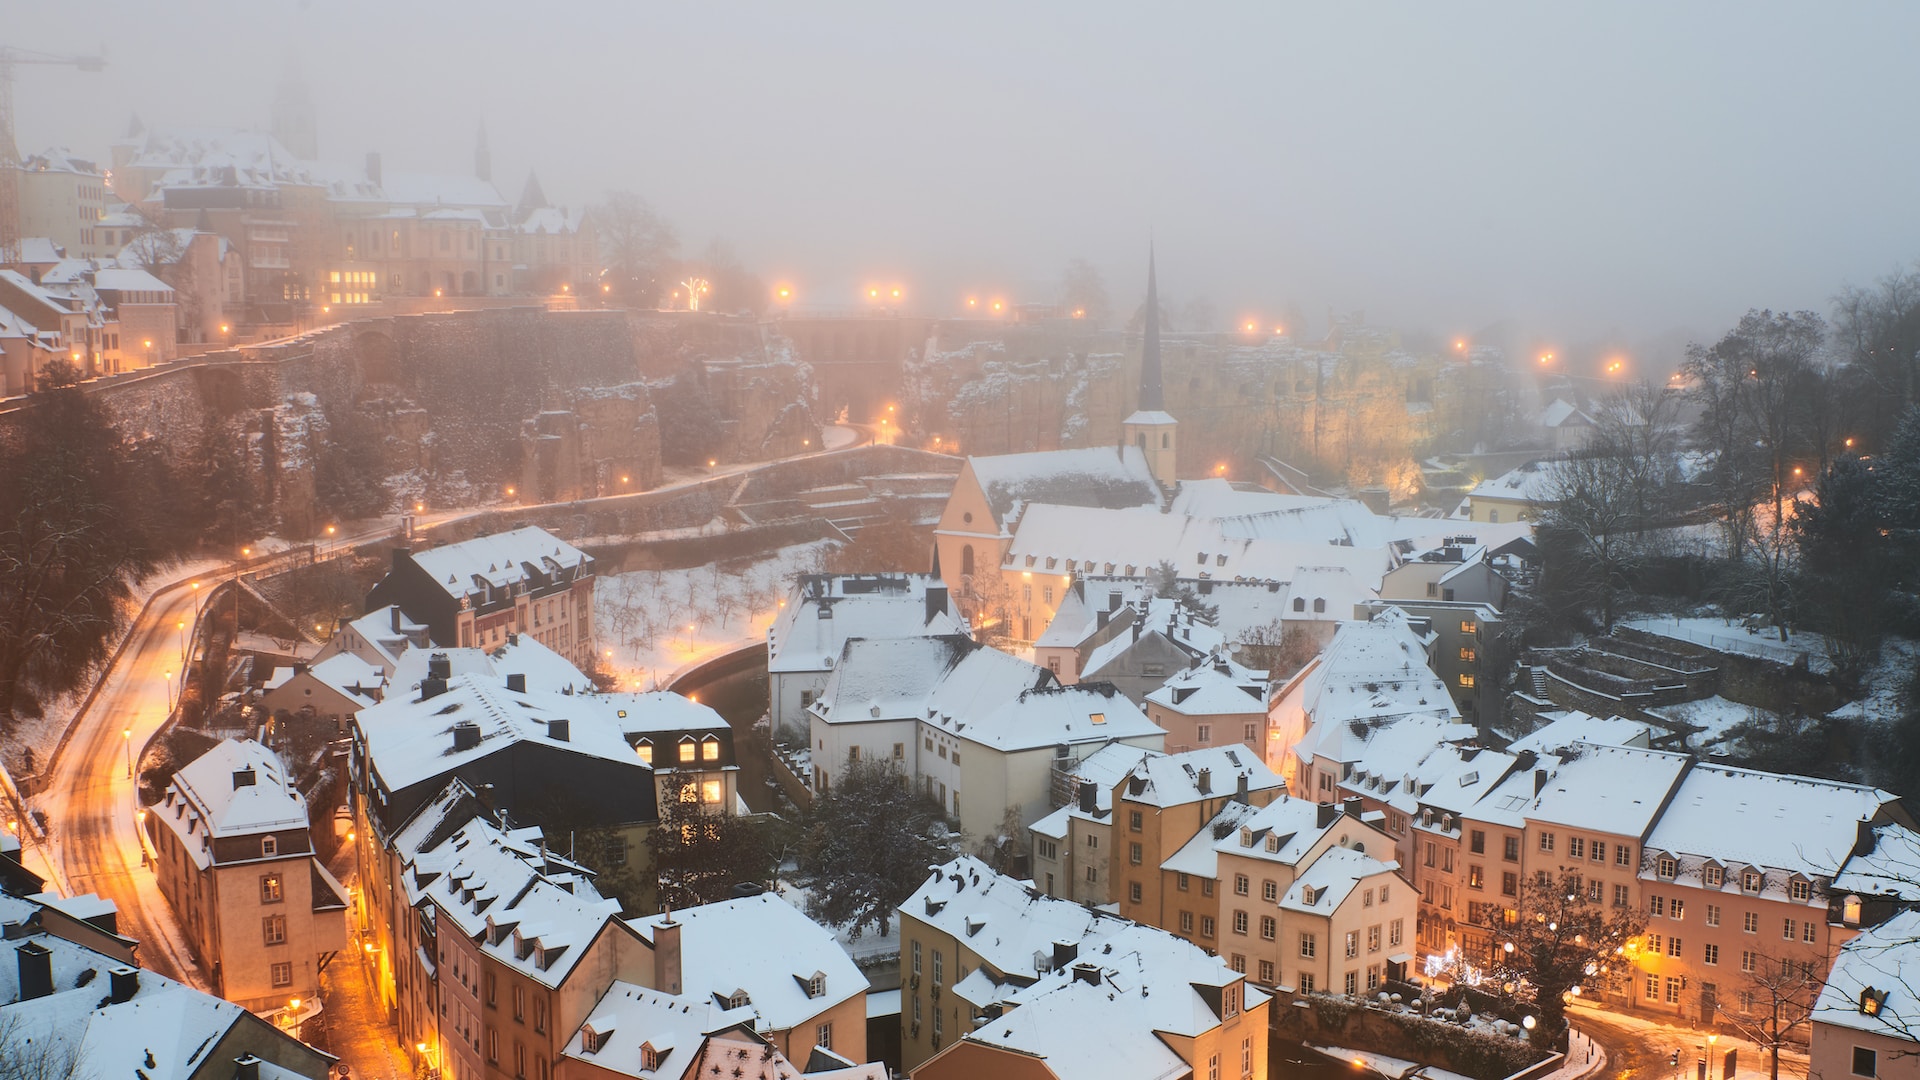 Learn all about the different Christmas customs and traditions in Luxembourg.